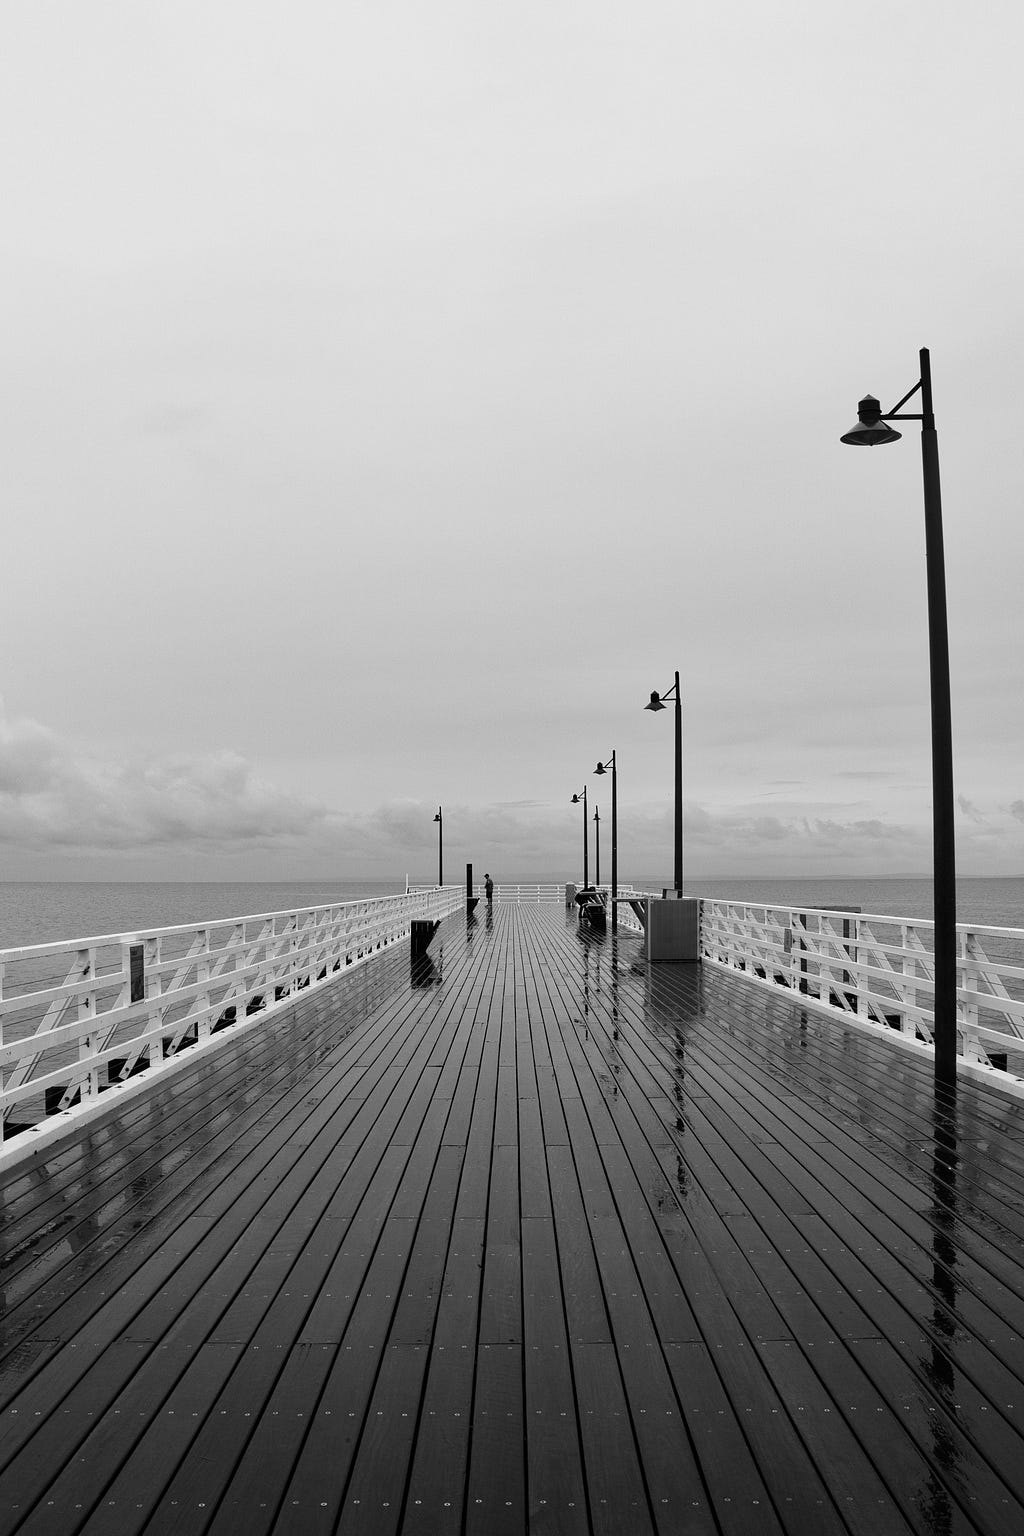 Black and white image of a wooden wet pier during a cloudy day